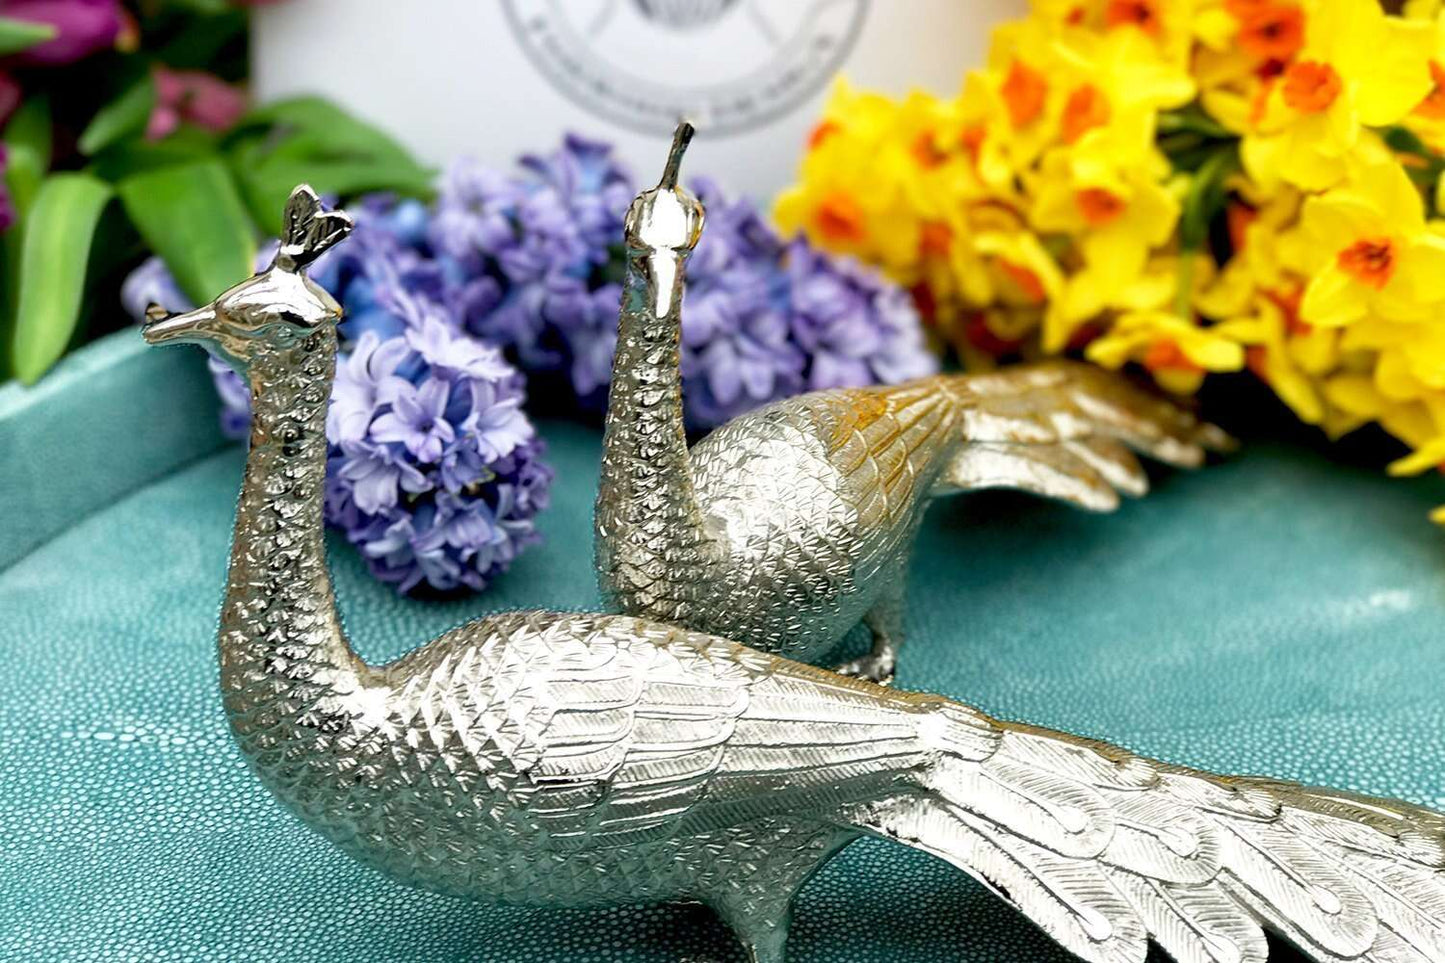 Peacock Dining table sculptures